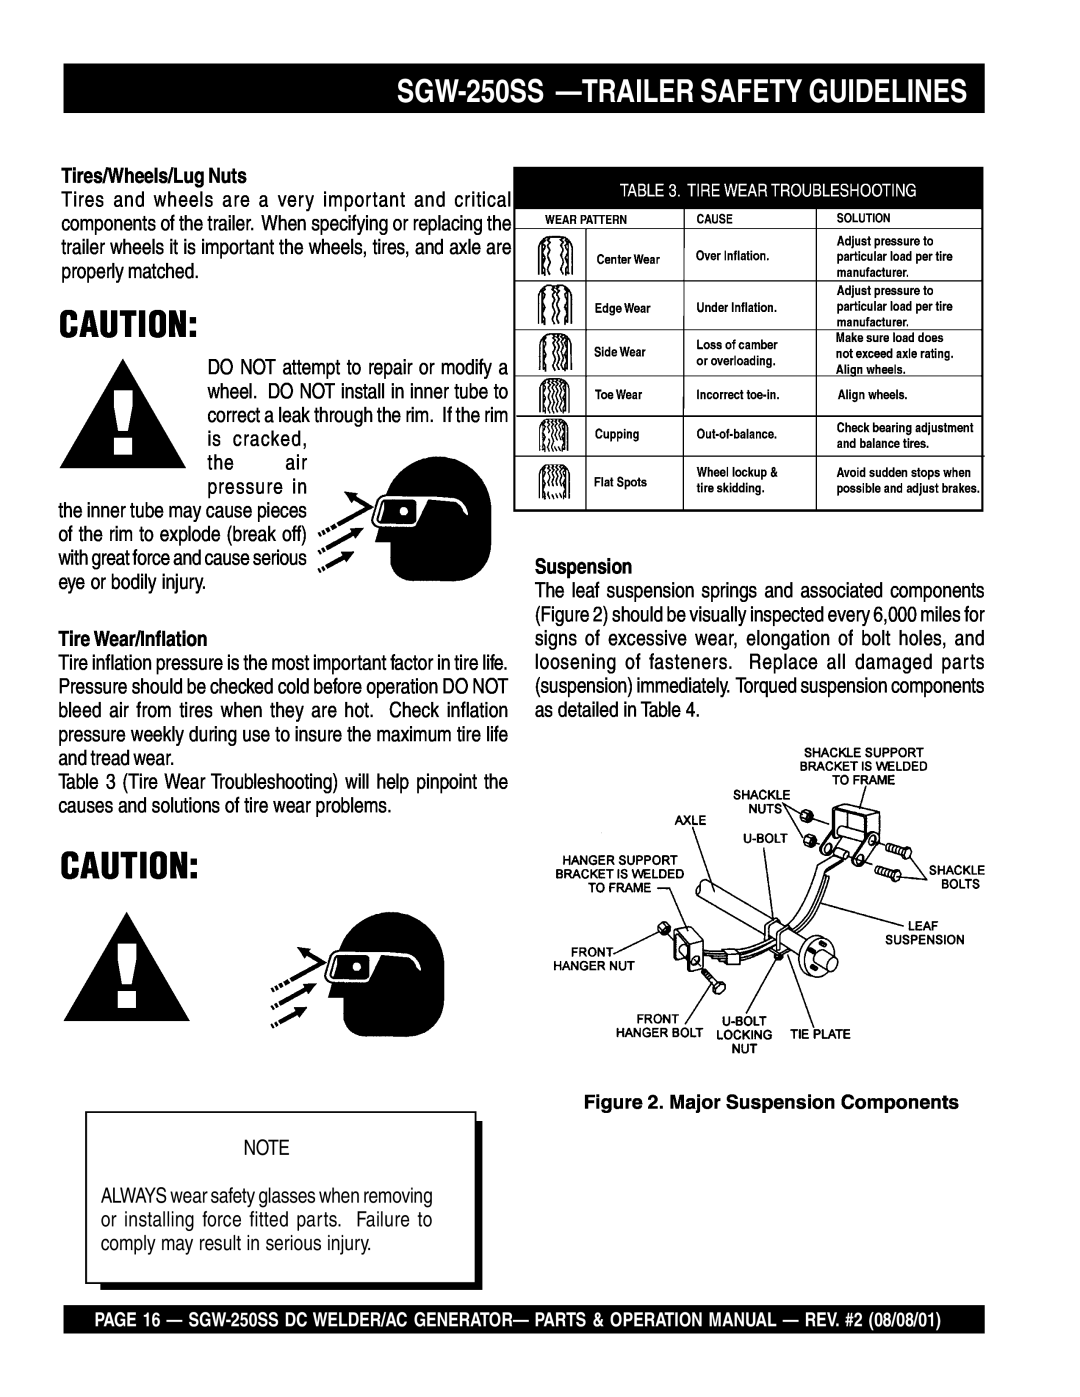 Multiquip operation manual SGW-250SS -TRAILERSAFETY GUIDELINES, Tires/Wheels/Lug Nuts, Tire Wear/Inflation, Suspension 